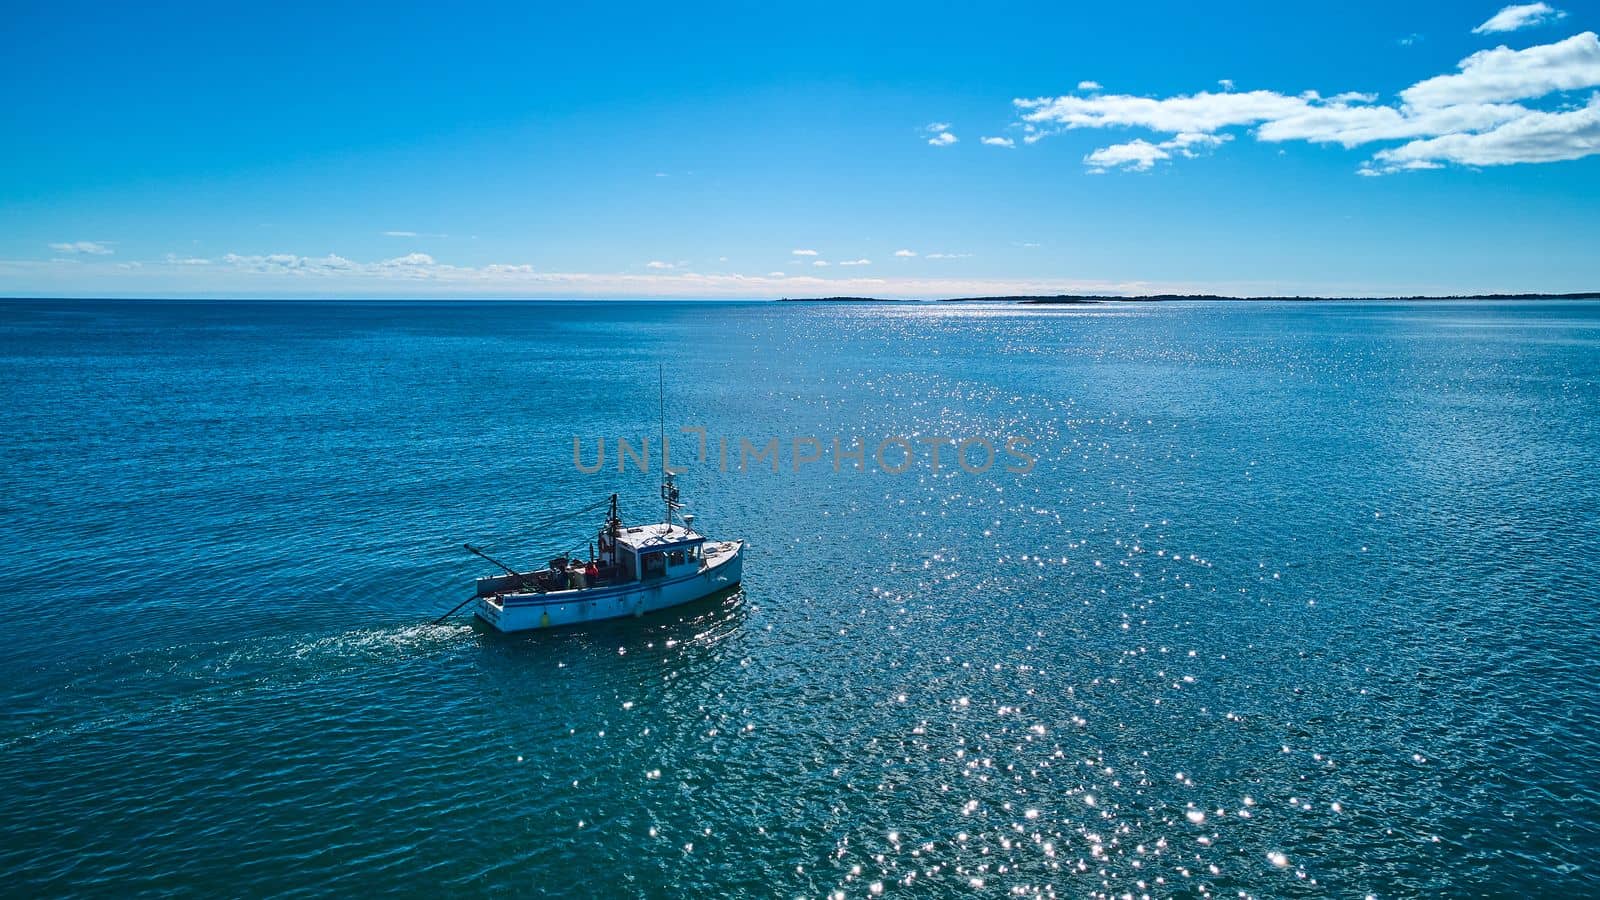 Fishing boat for lobster and clams on Maine ocean by njproductions